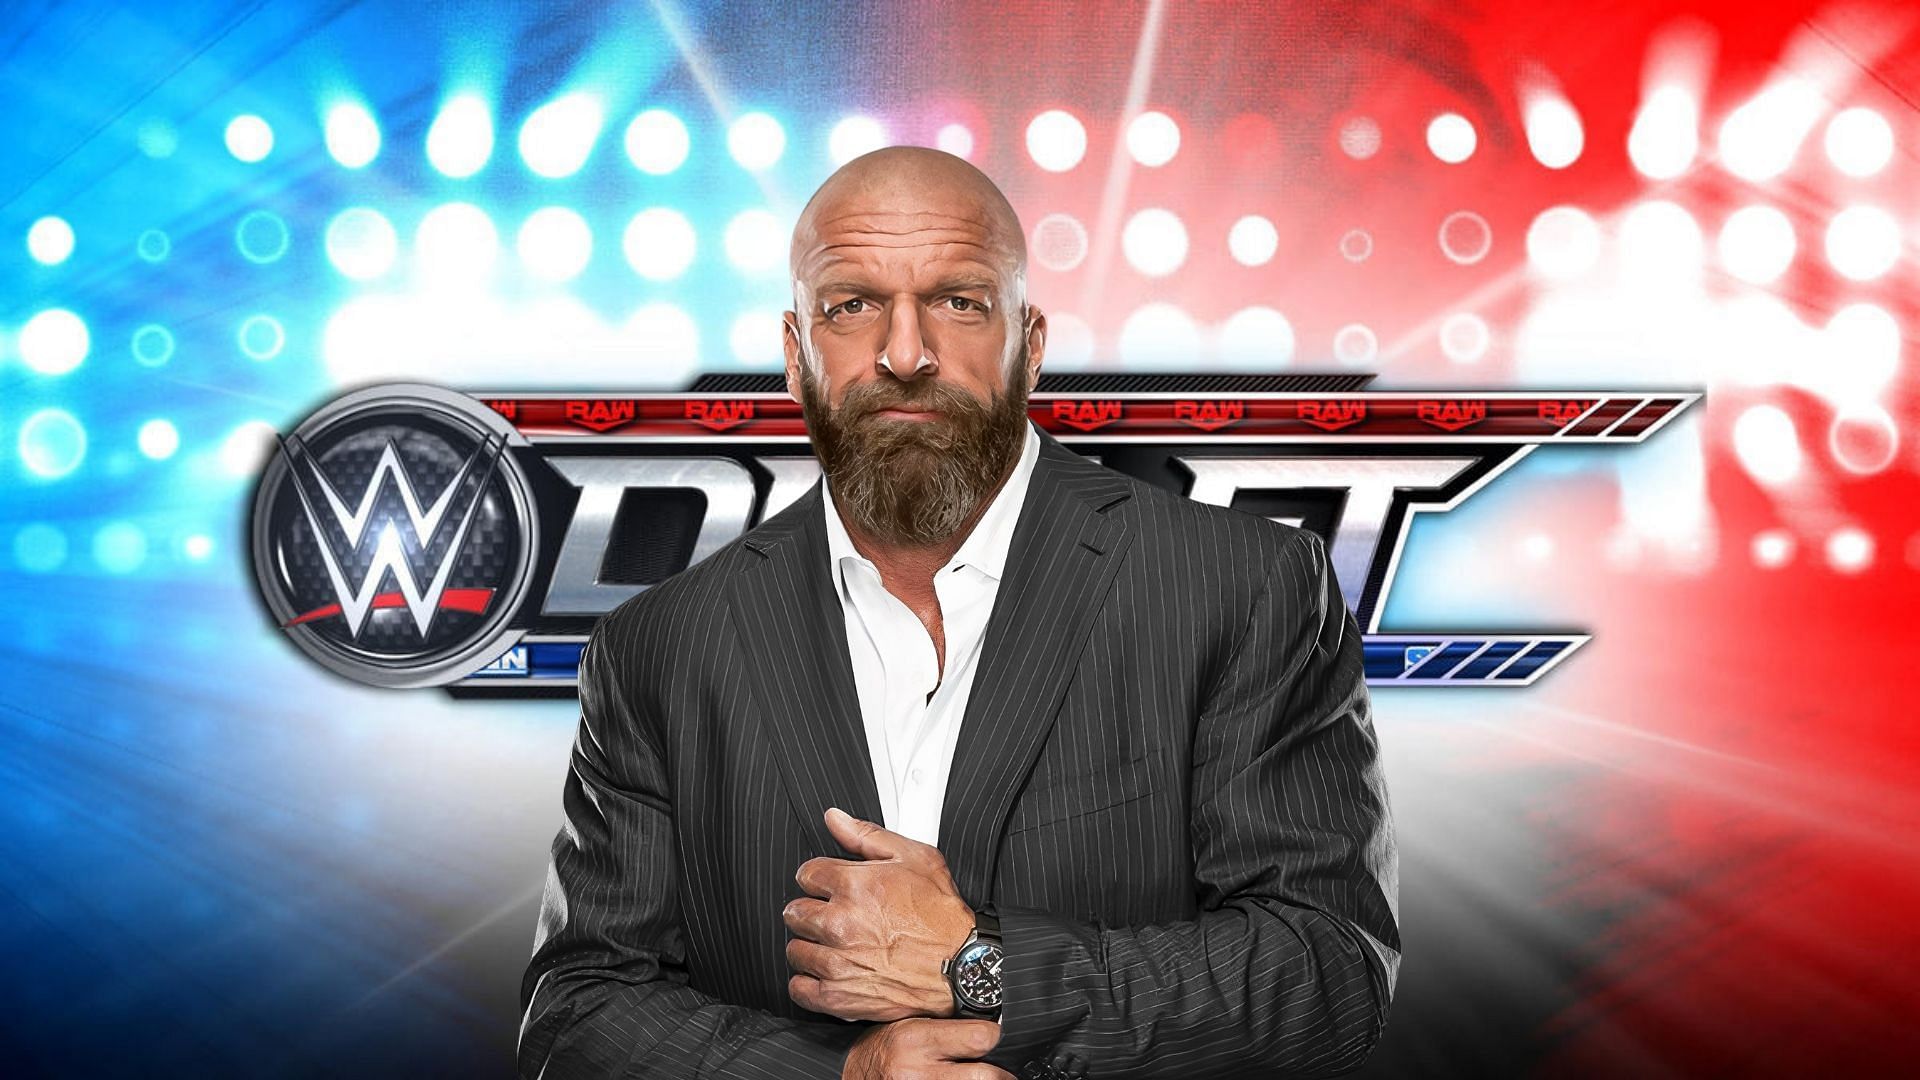 The WWE Draft begins this Friday on SmackDown.